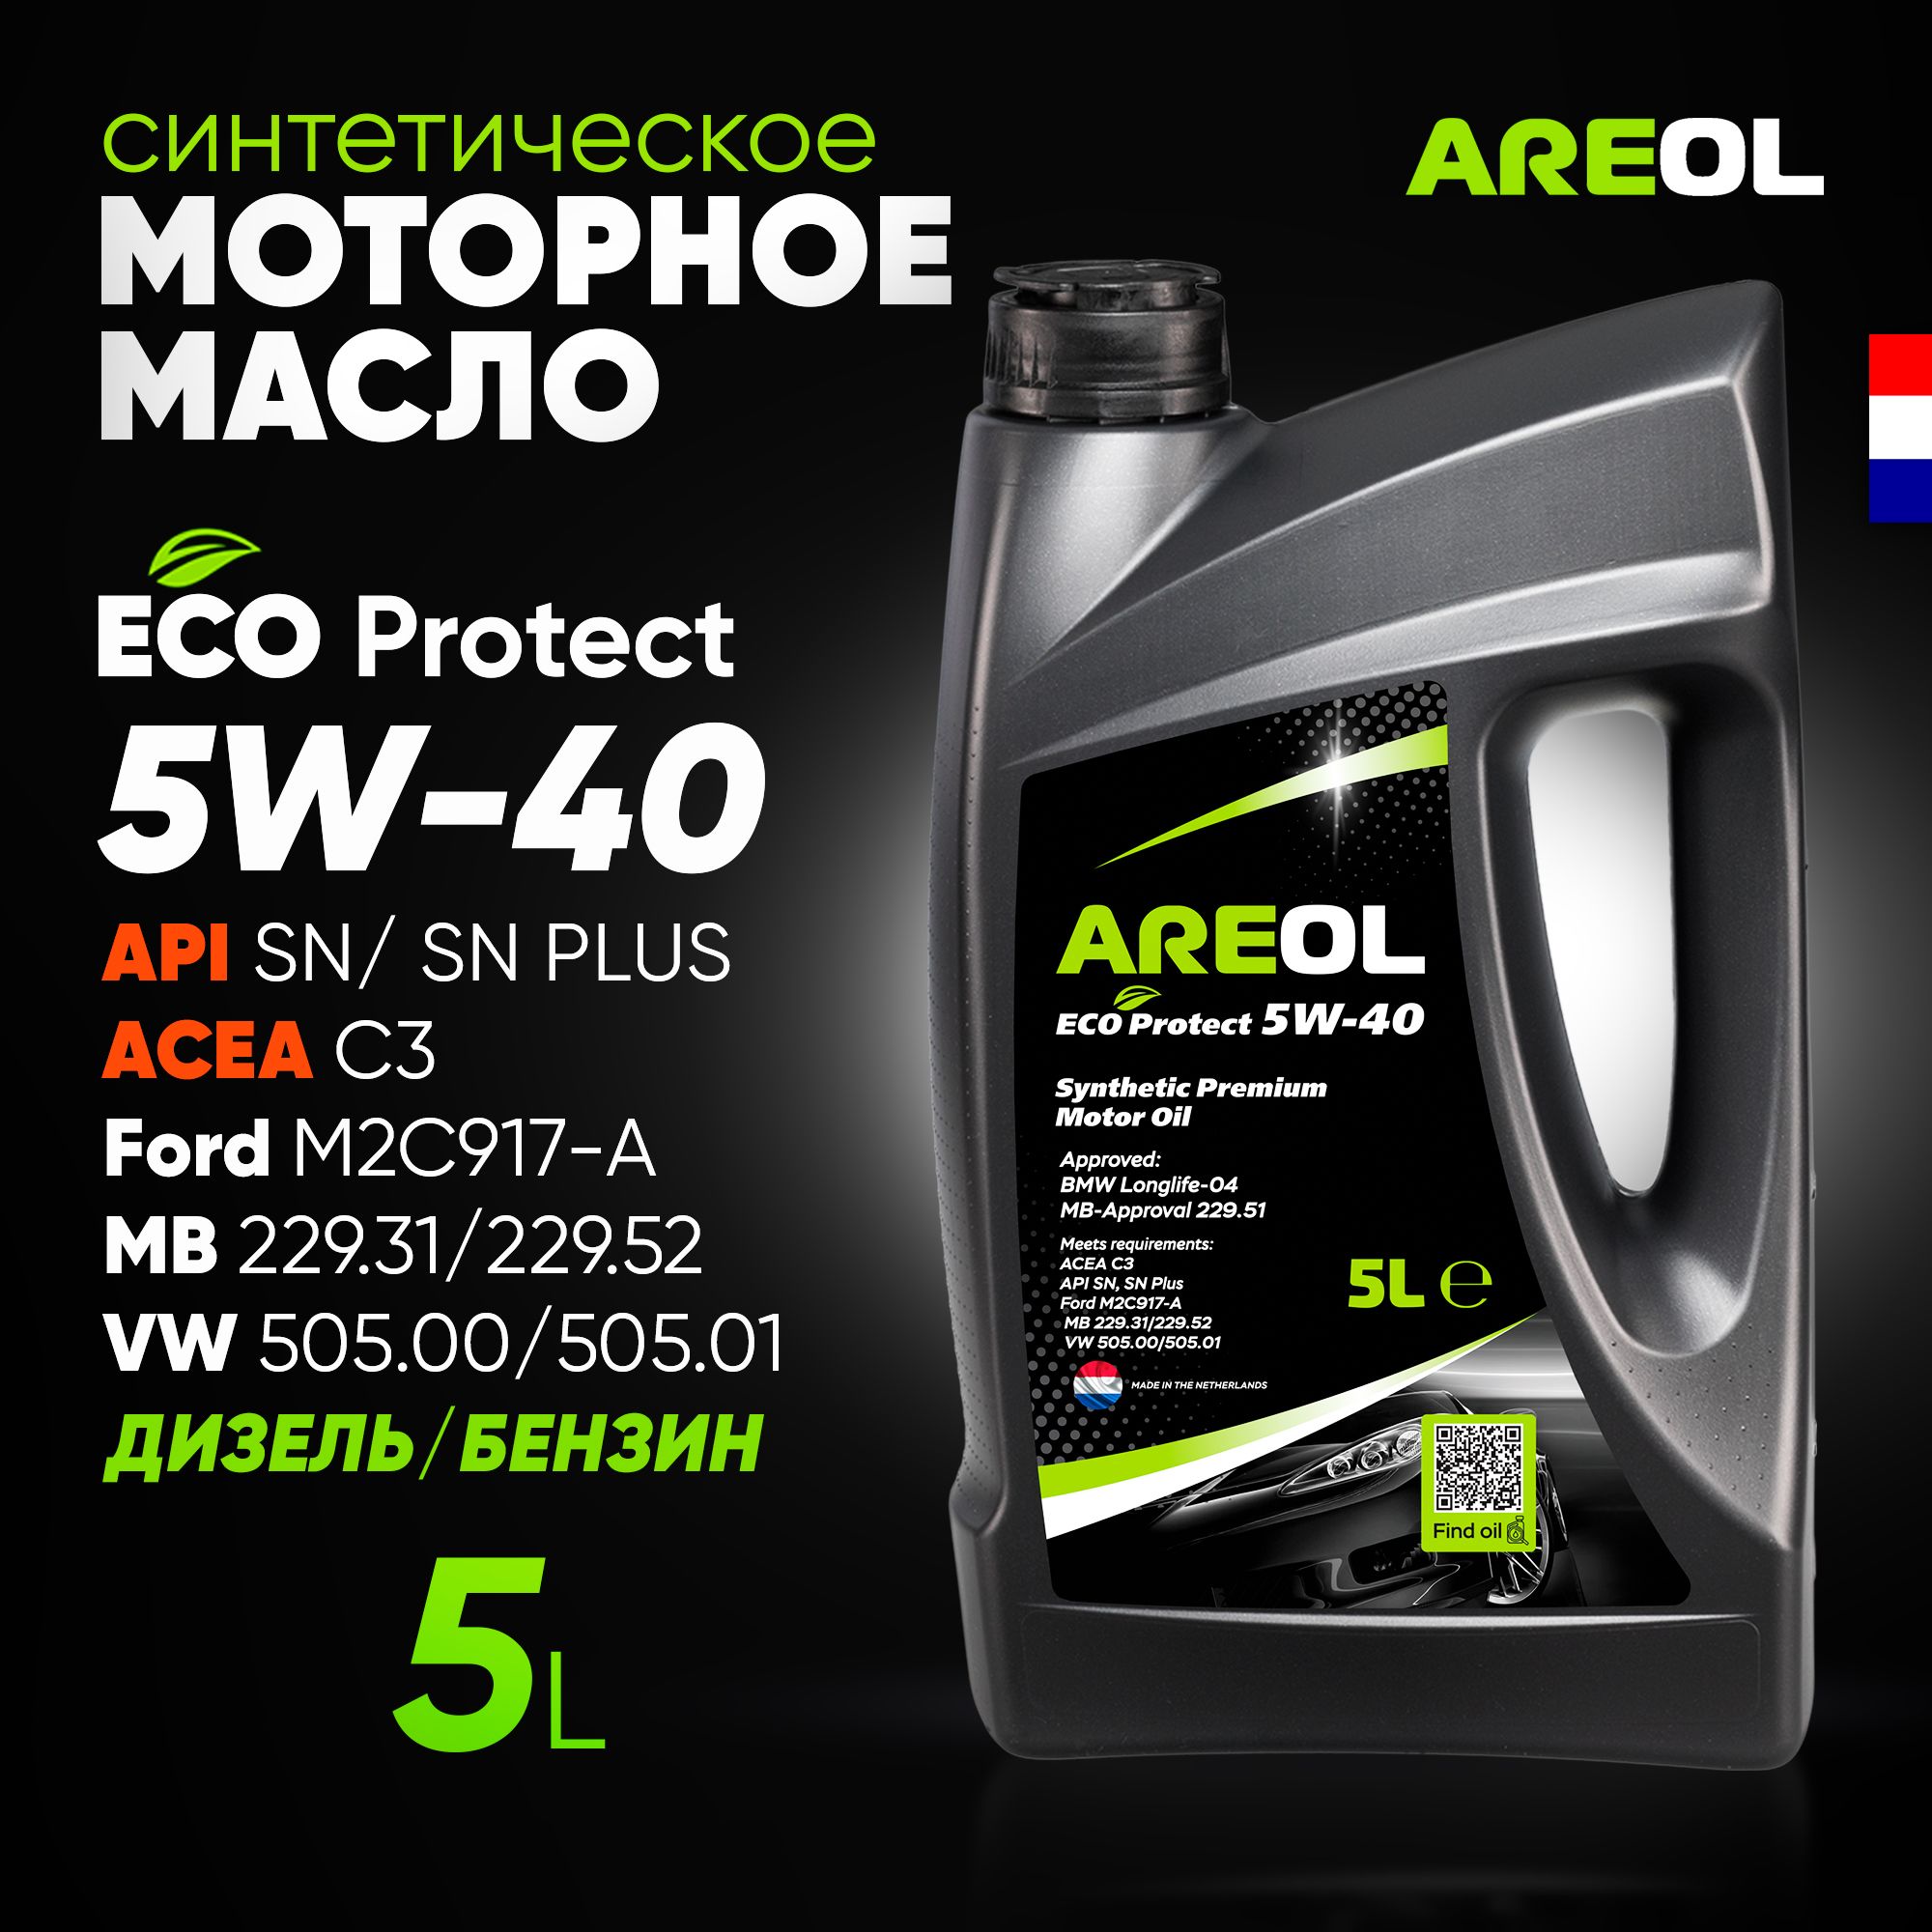 Масло ареол 5w40. Areol 5w30. Areol Max protect 5w-40 5l. Масло ореол 5w30. Масло ареол 5w30 5л.